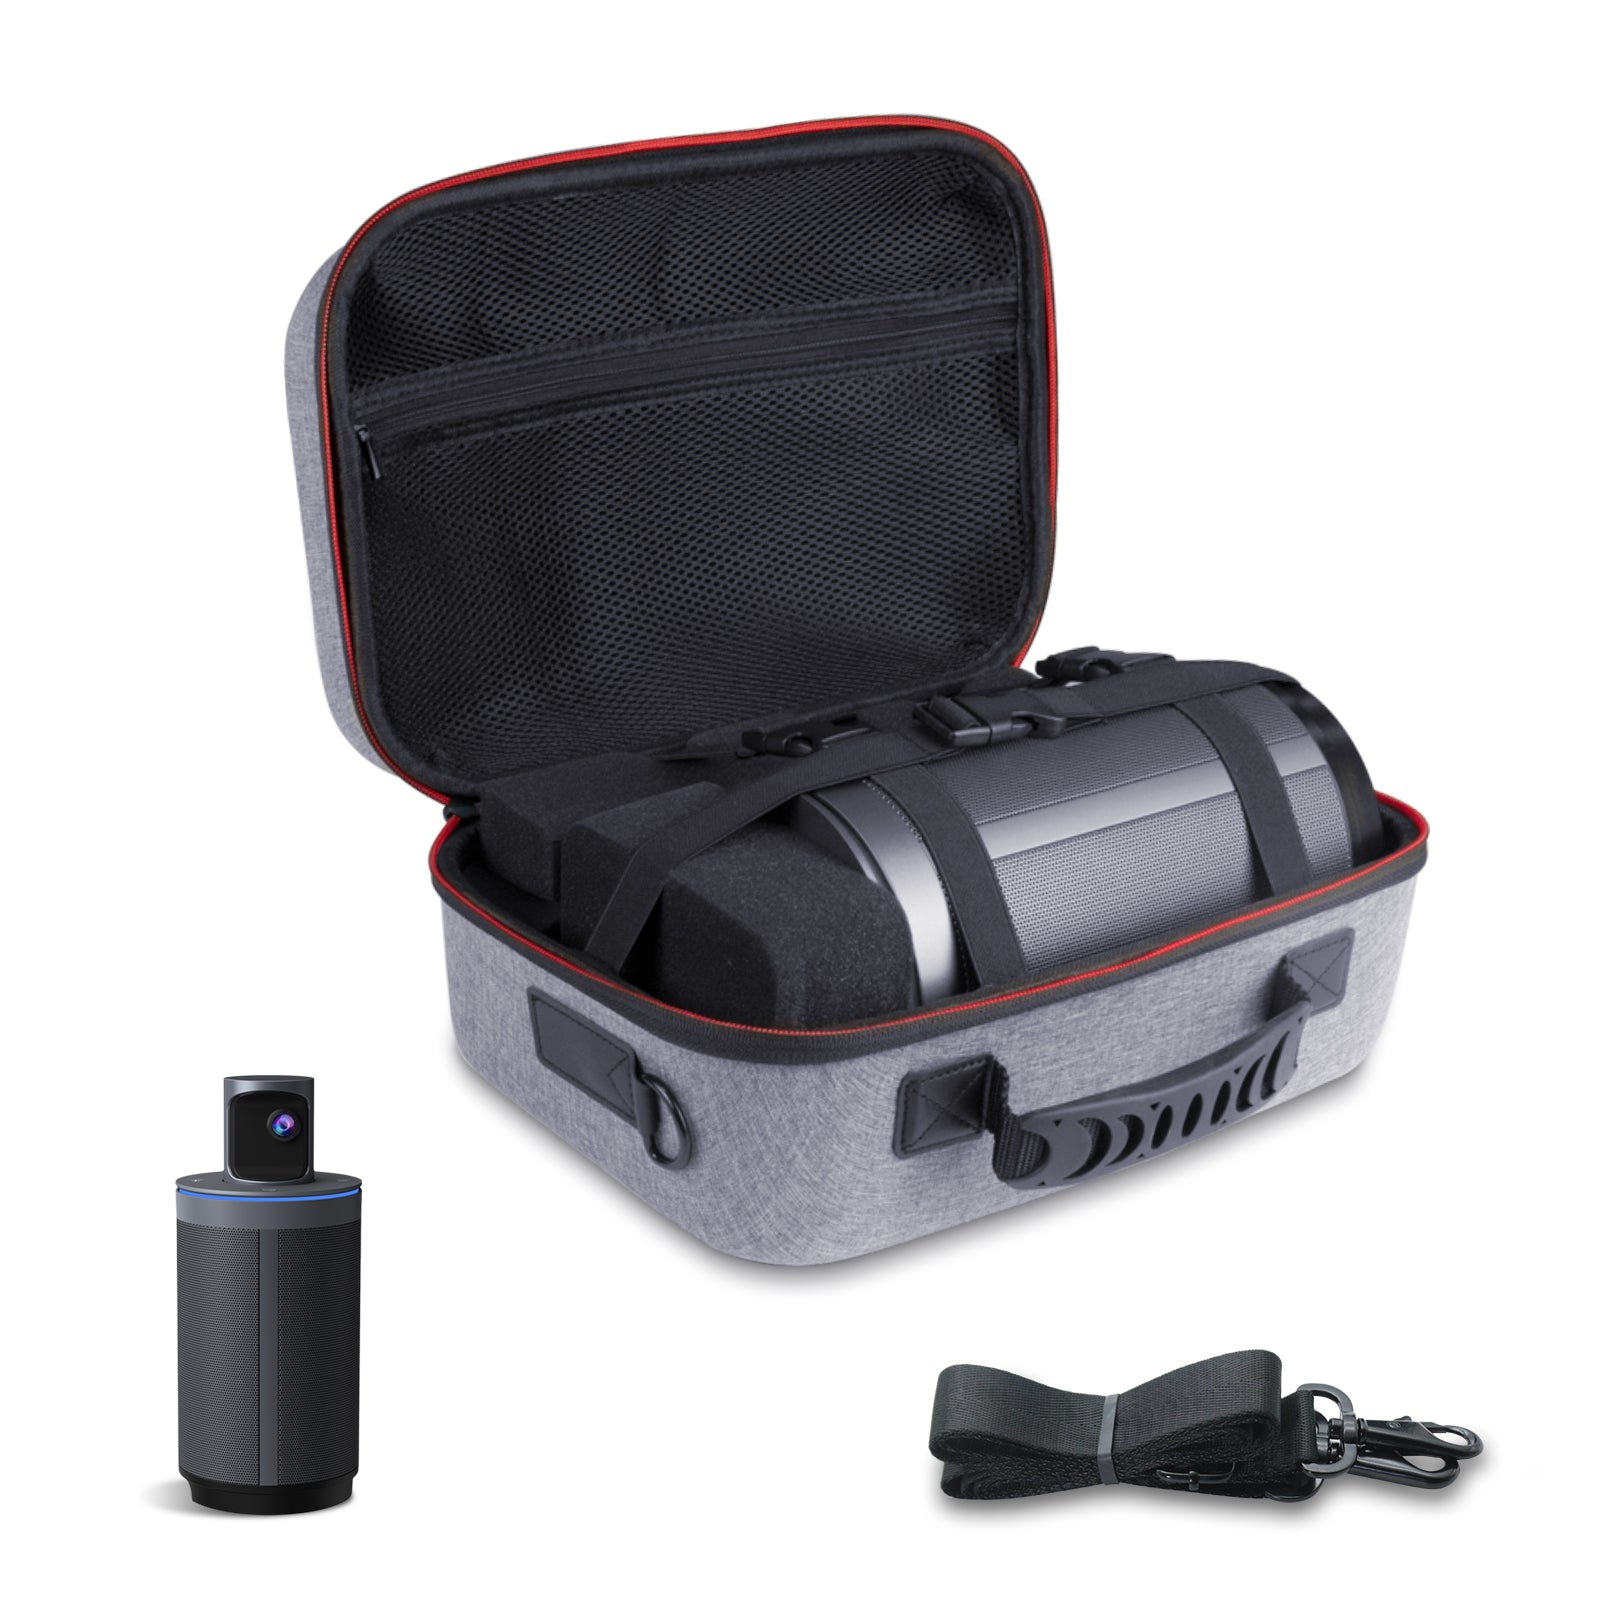 Conference Camera Travel Case with carrying belt. 